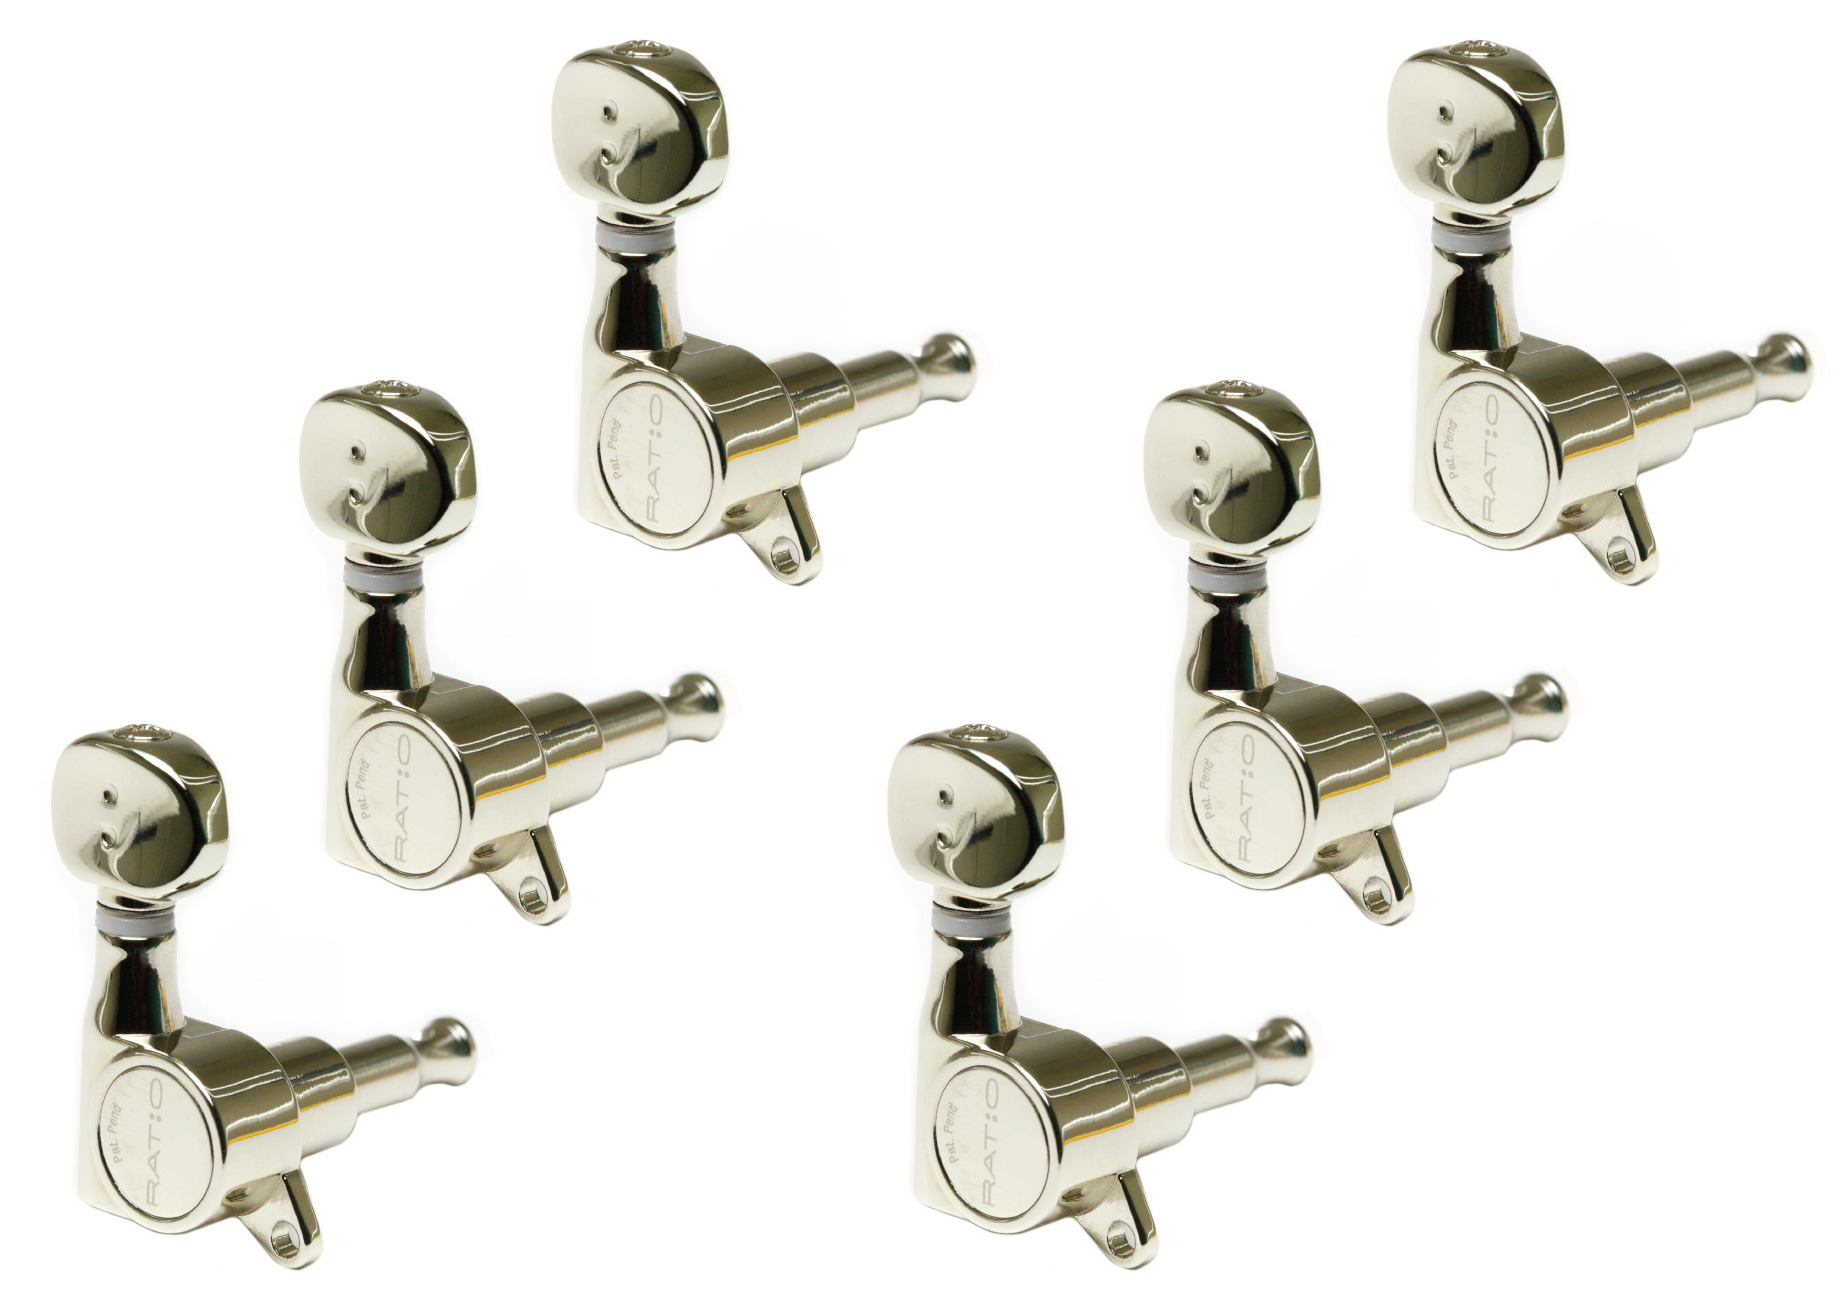 Graph Tech PRN-4731-N0 Ratio Electric Guitar Machine Heads with Classic Button, Offset Screw - 6-in-Line, Bass Side (Left) - Nickel